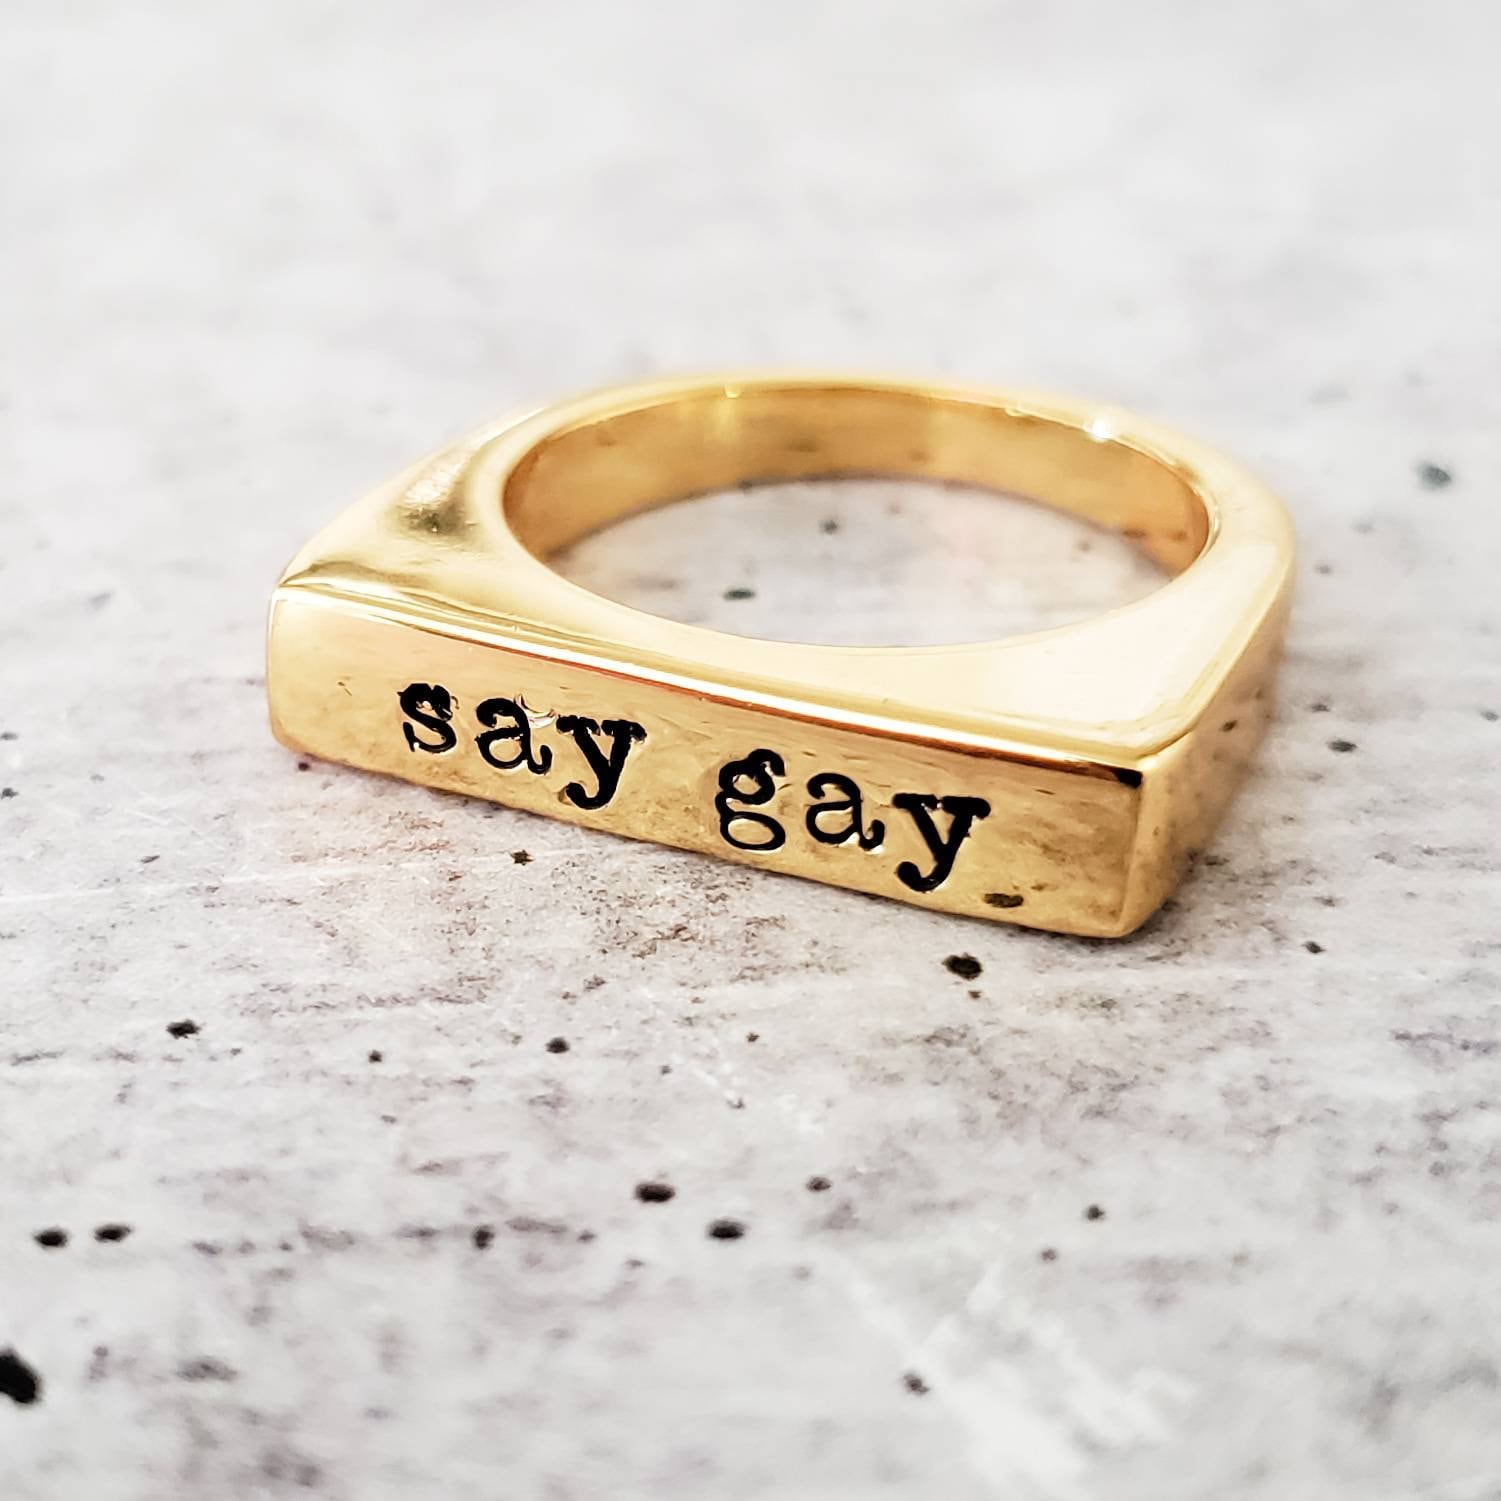 Say Gay Pride Ring -  LGBTQIA Jewelry - Political Gold Plated Ring - Personalized for Non Binary - Gay Pride Jewelry for Ally - Pride Month